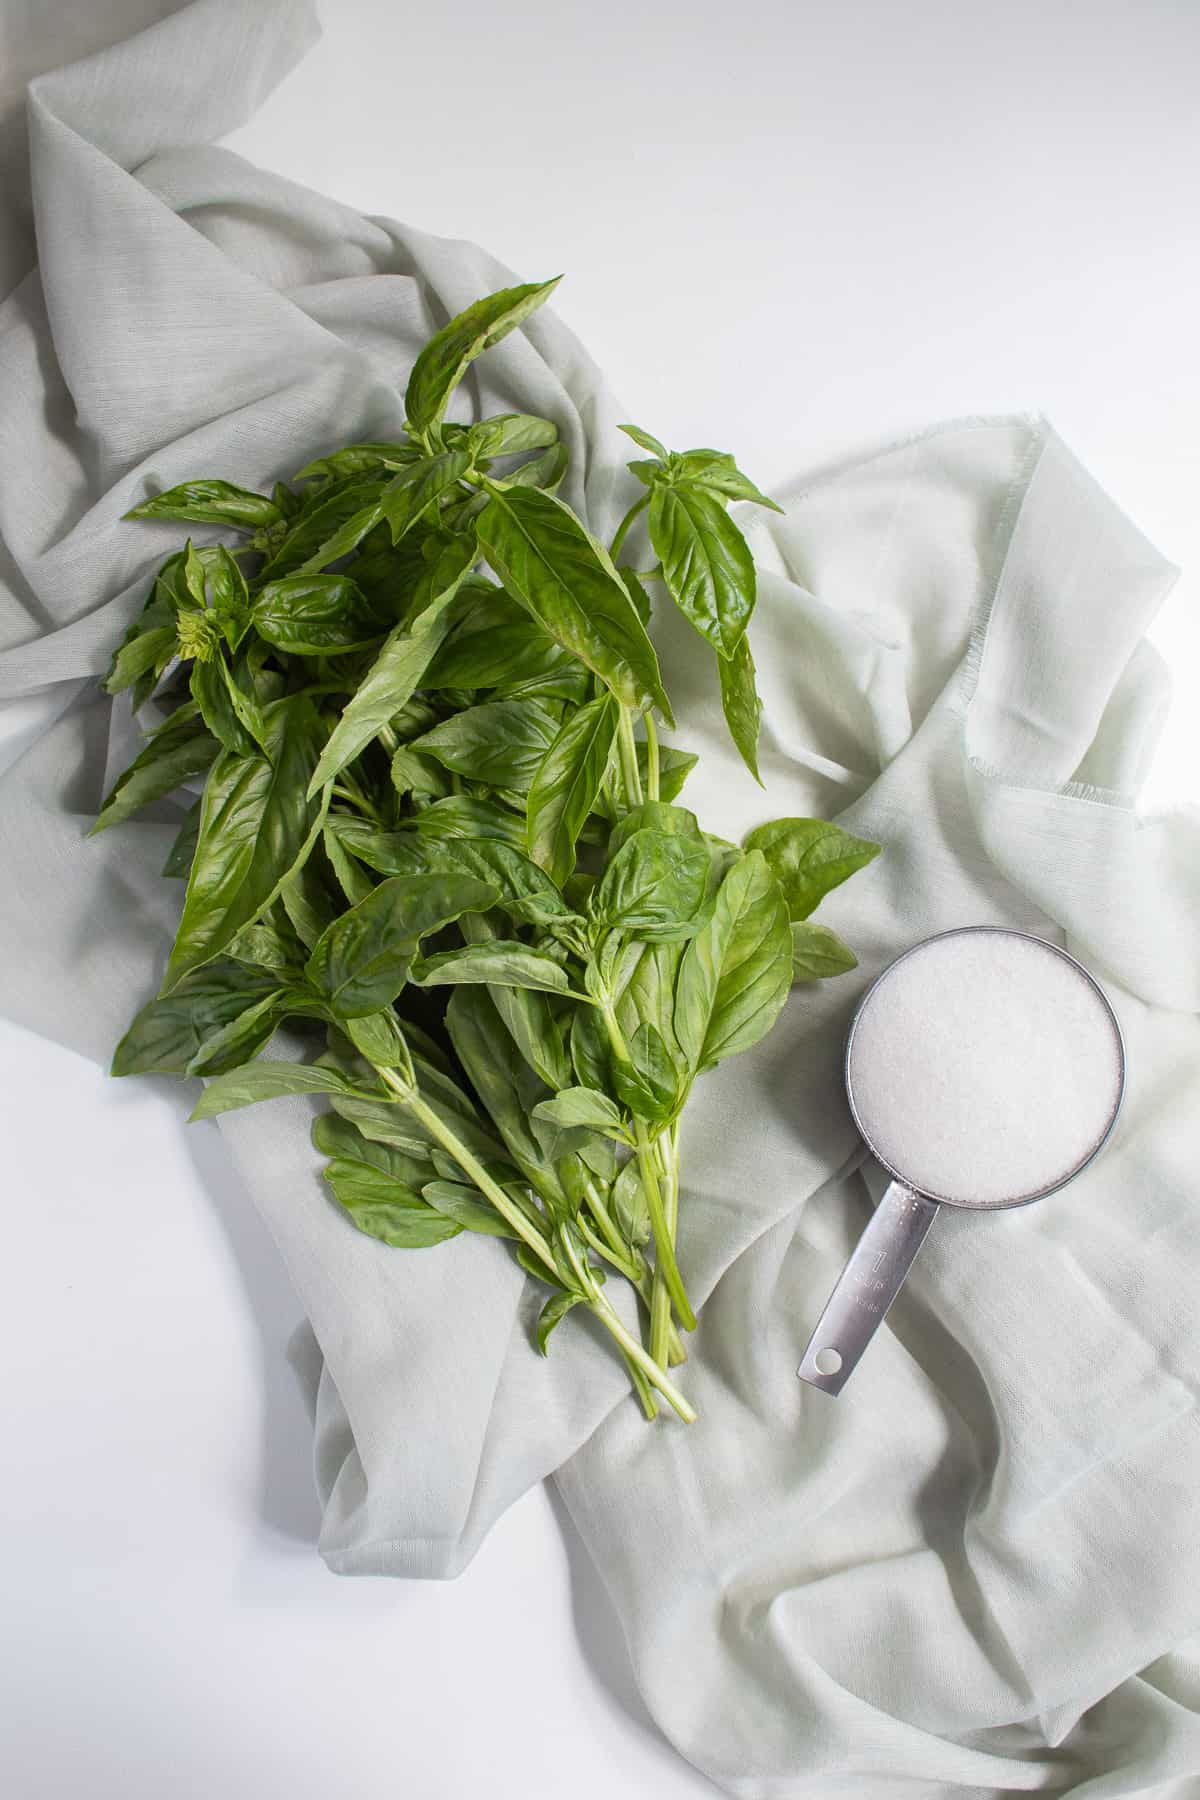 A bunch of basil leave sand a cup of sugar are displayed over a pale green fabric background.